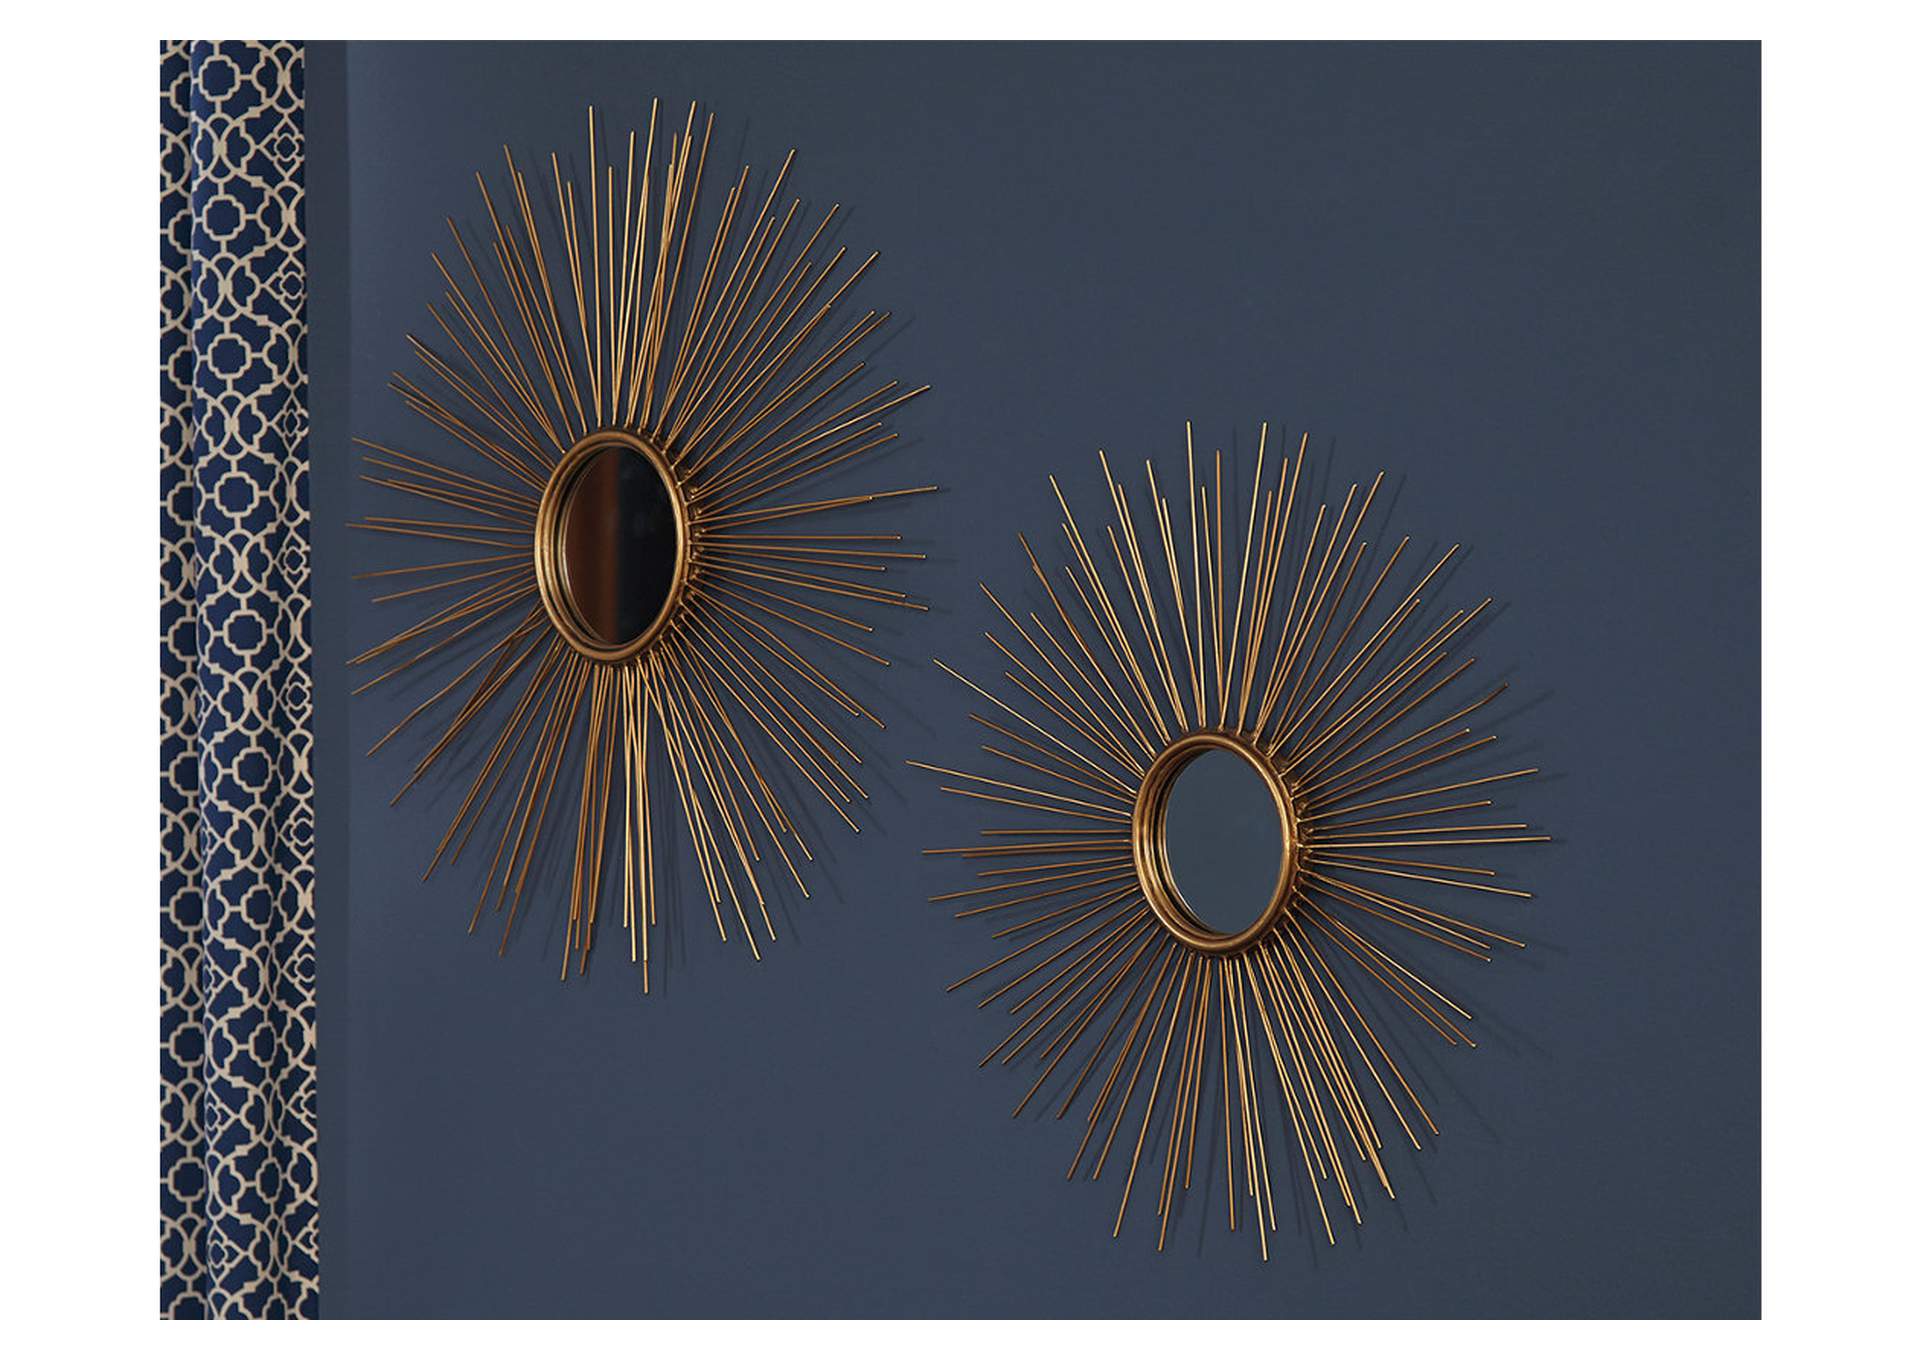 Doniel Accent Mirror (Set of 2),Signature Design By Ashley